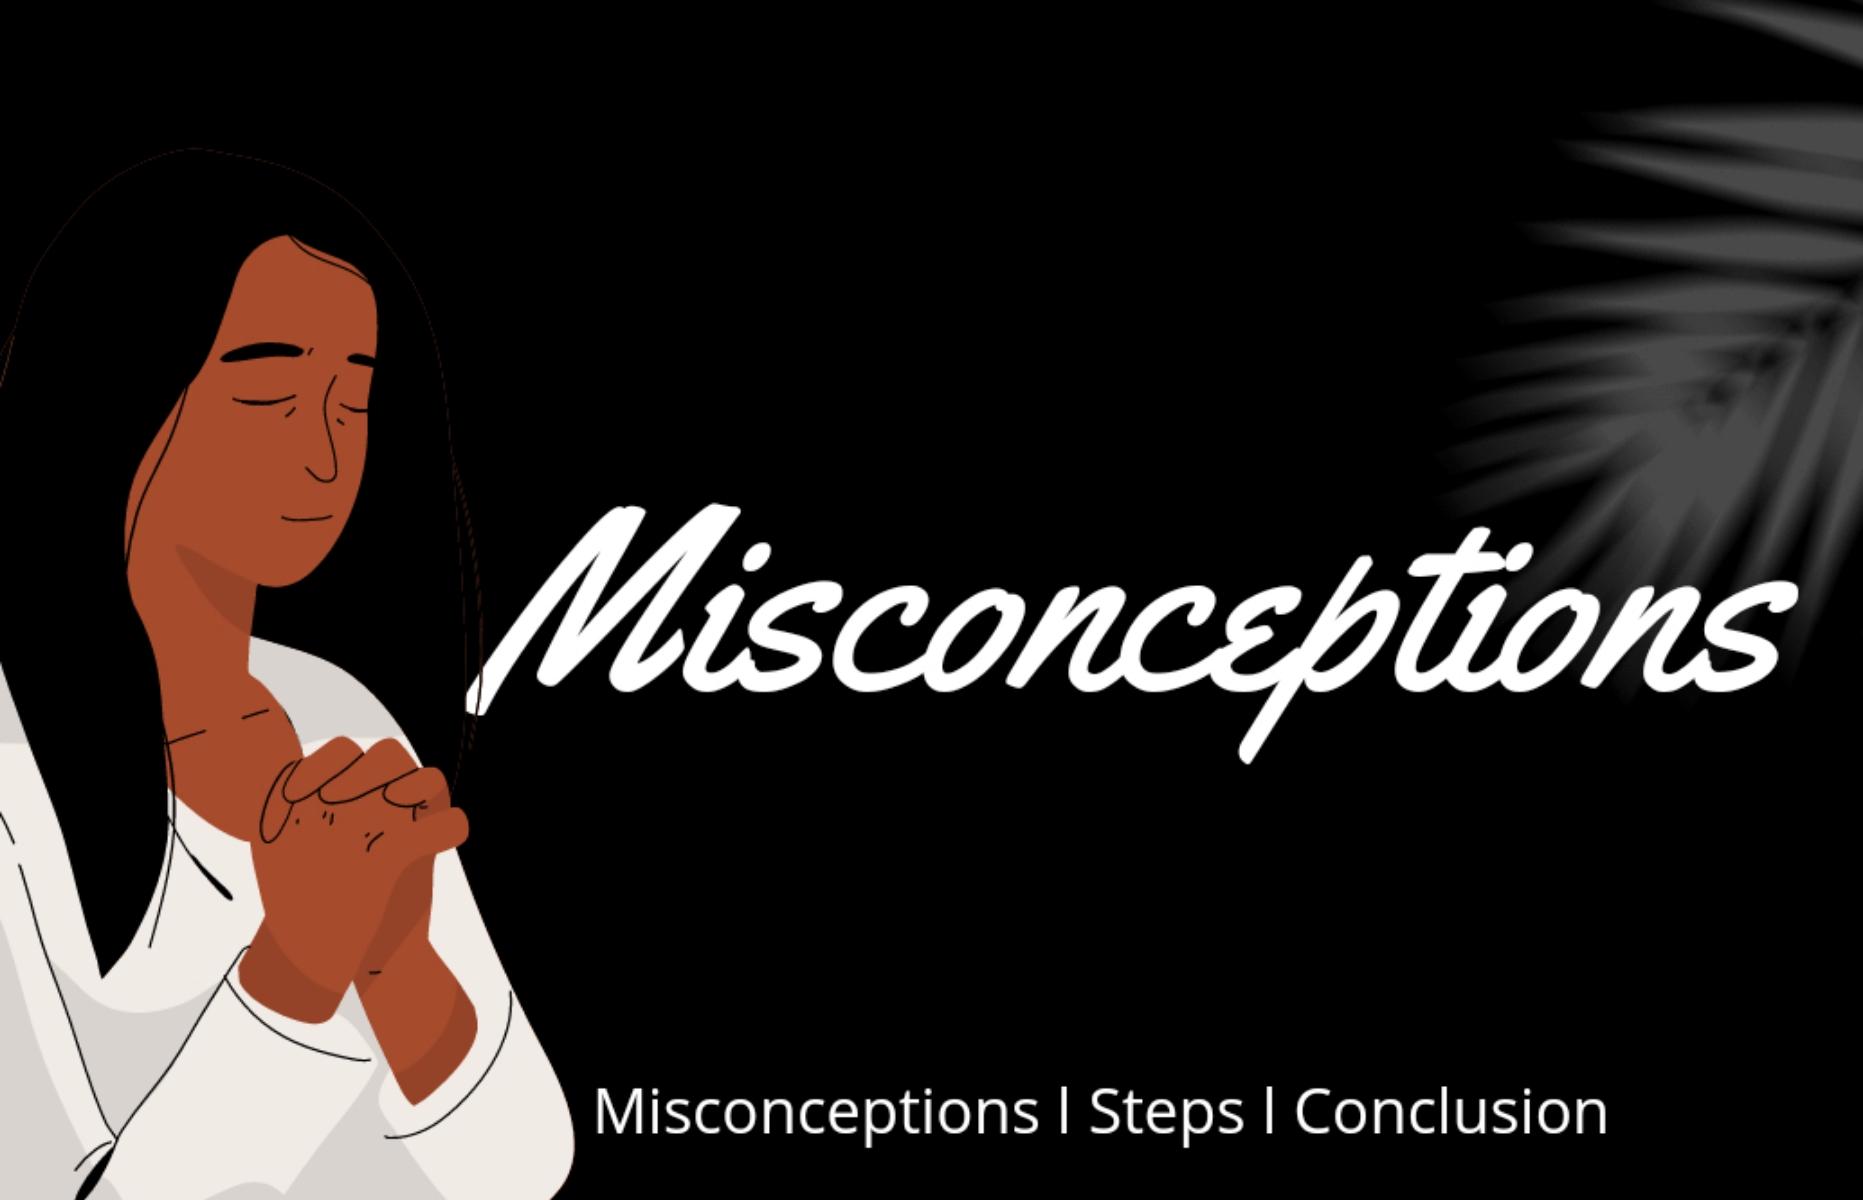 Misconceptions About Prayer